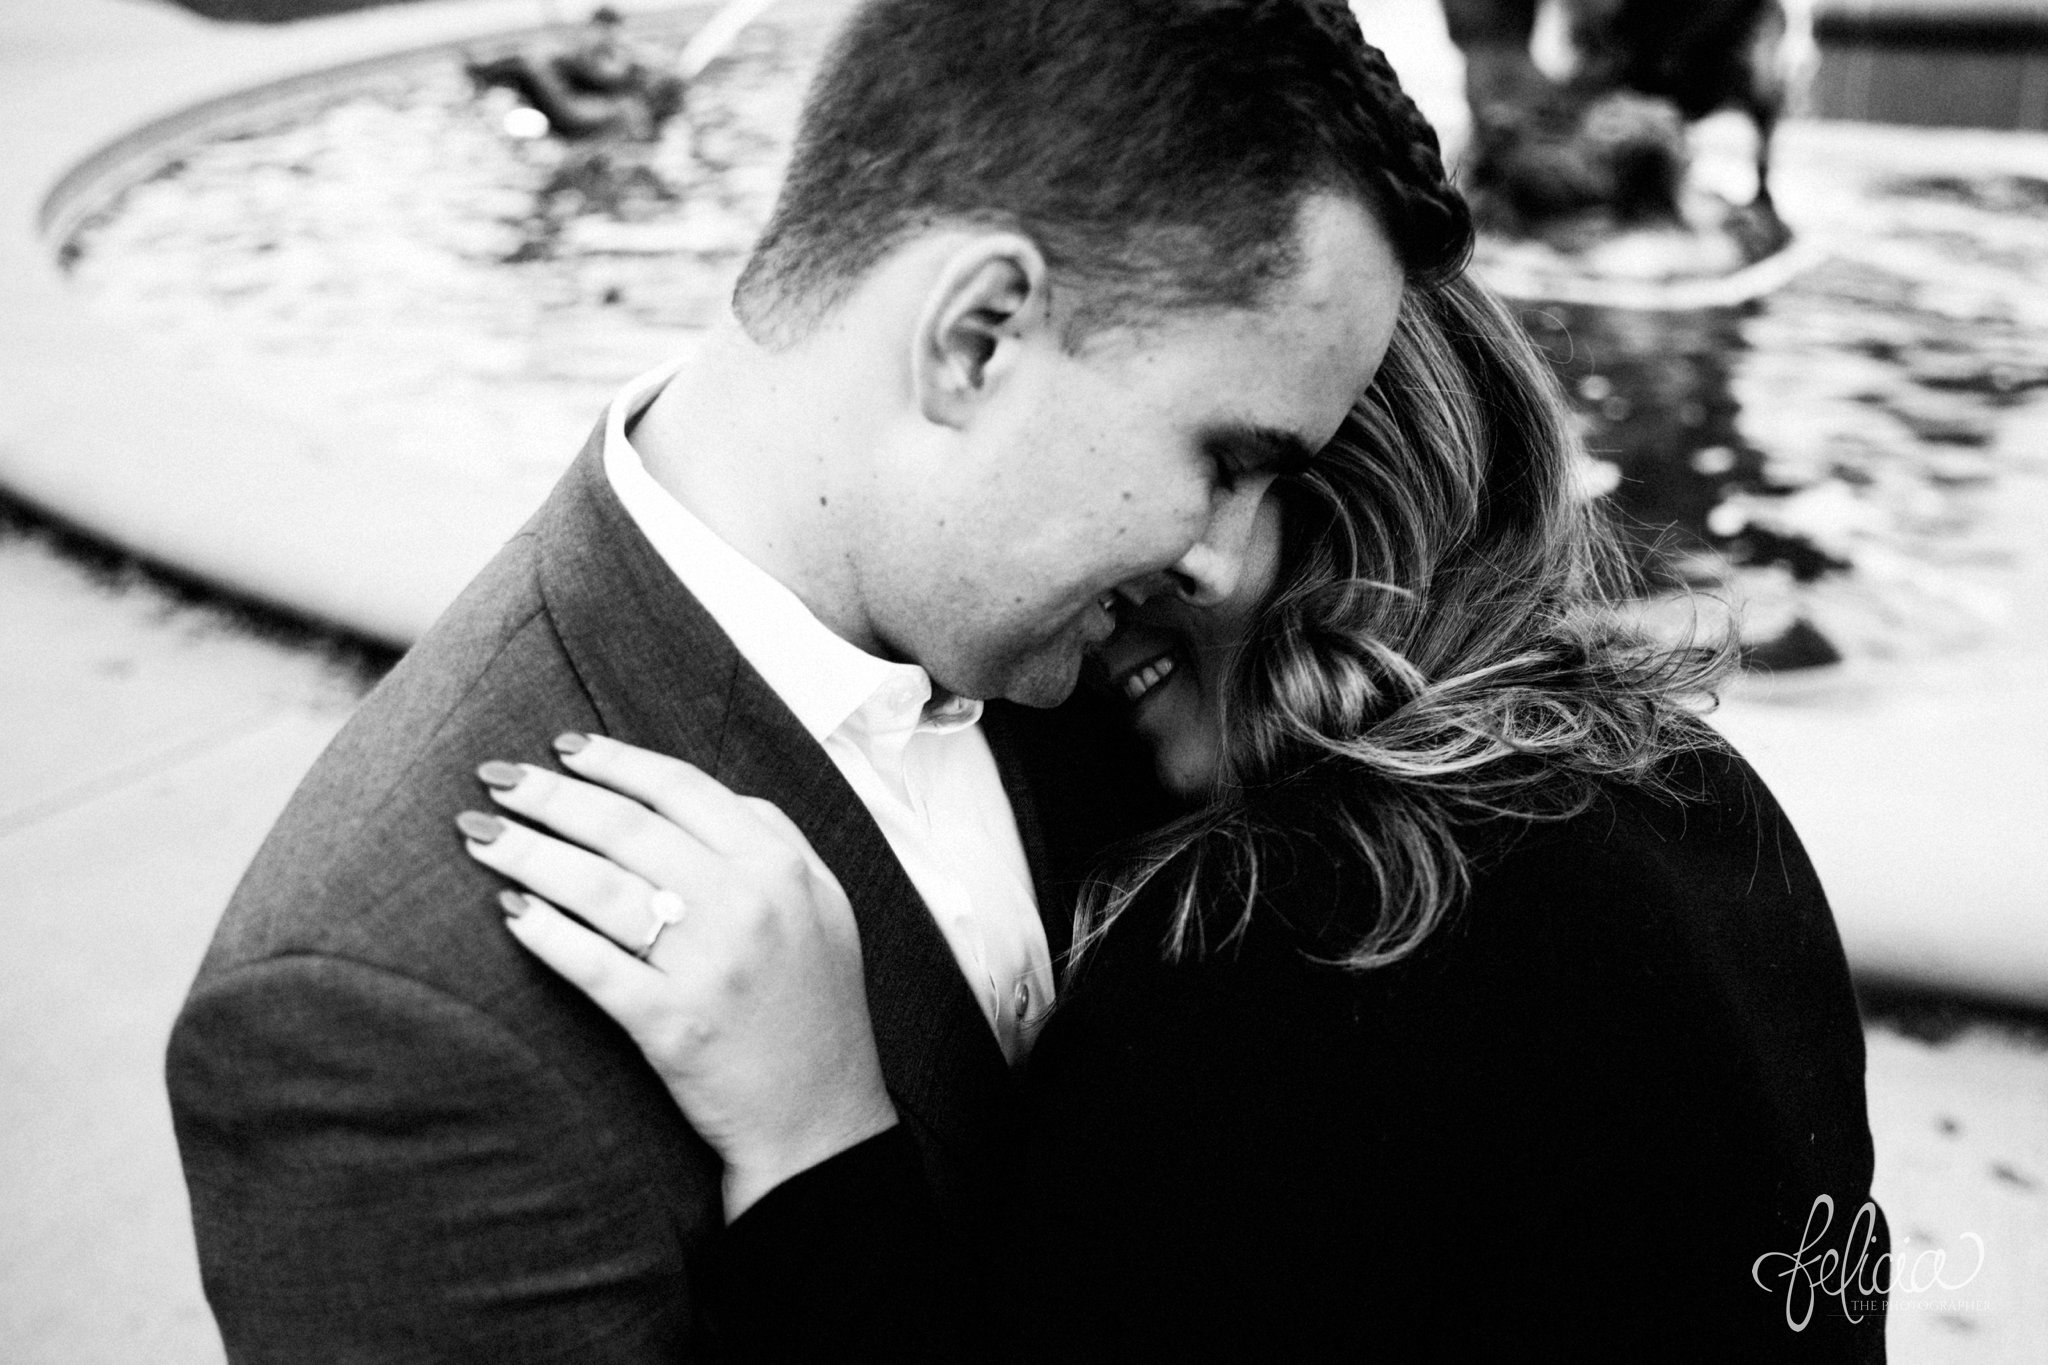 black and white | engagement photos | engagement photography | Kansas City | images by feliciathephotographer.com | architectural backgrounds | downtown | downtown Kansas City | fountain | hands on shoulders | engagement ring | circle cut | closed eyes | romantic pose | cuddling 